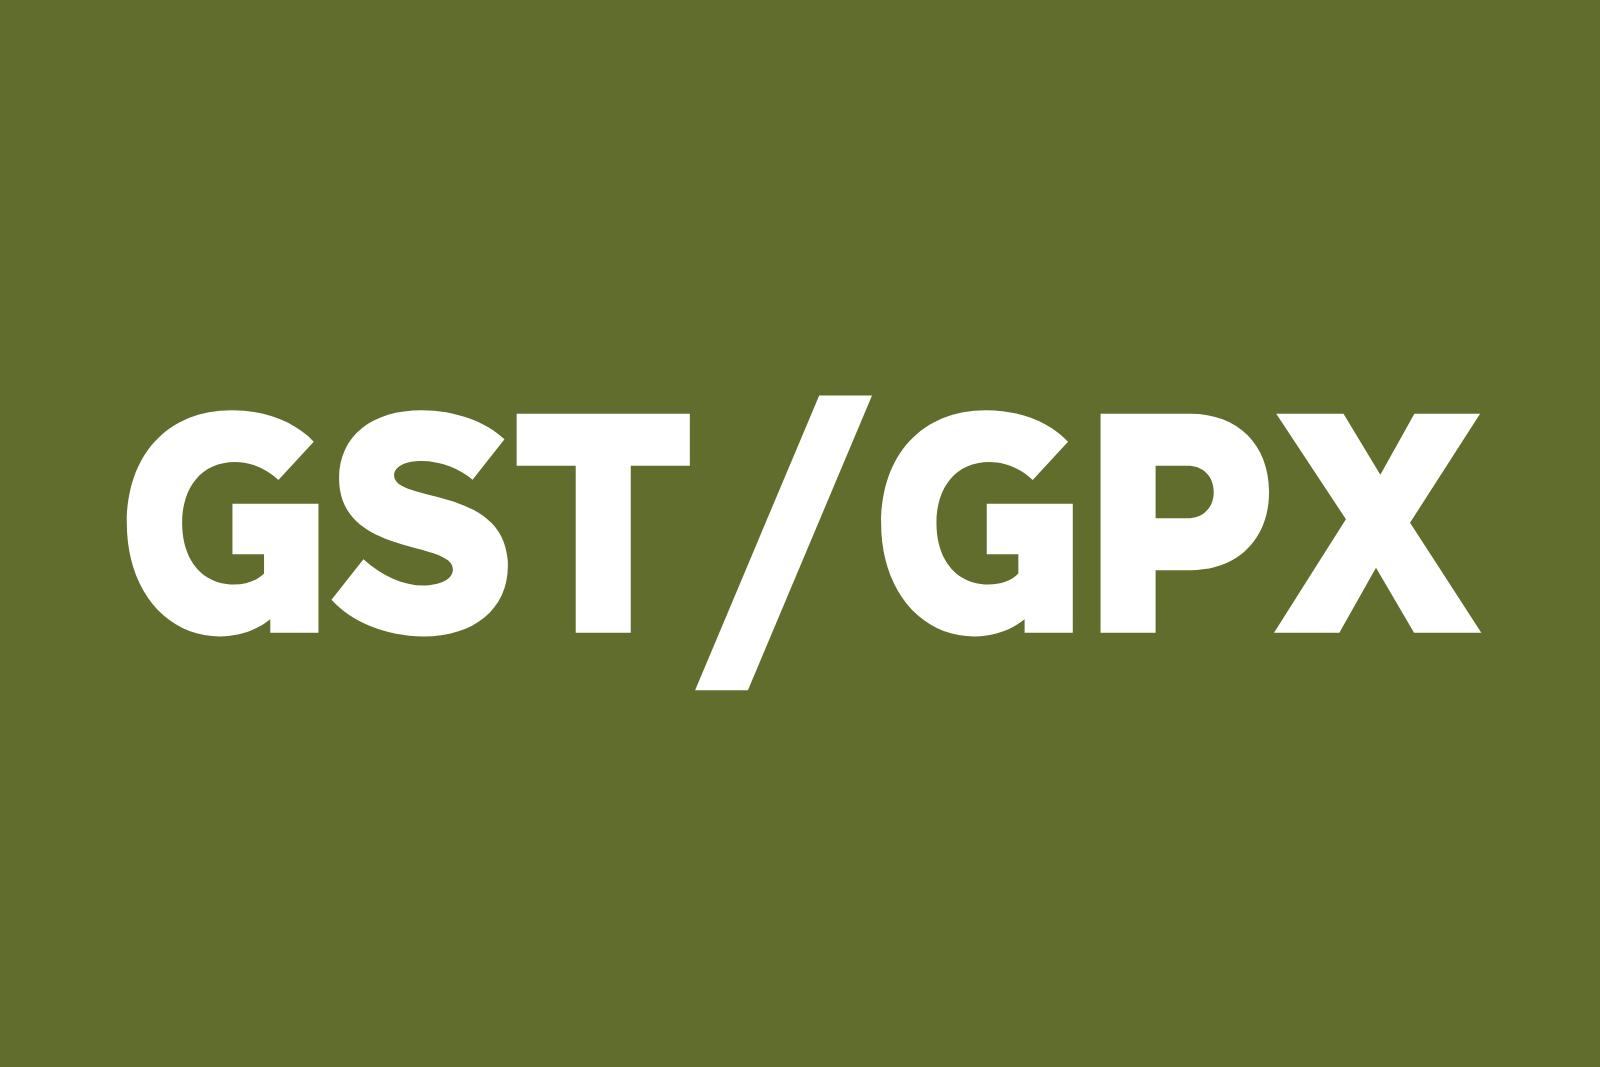 What is GST GPX